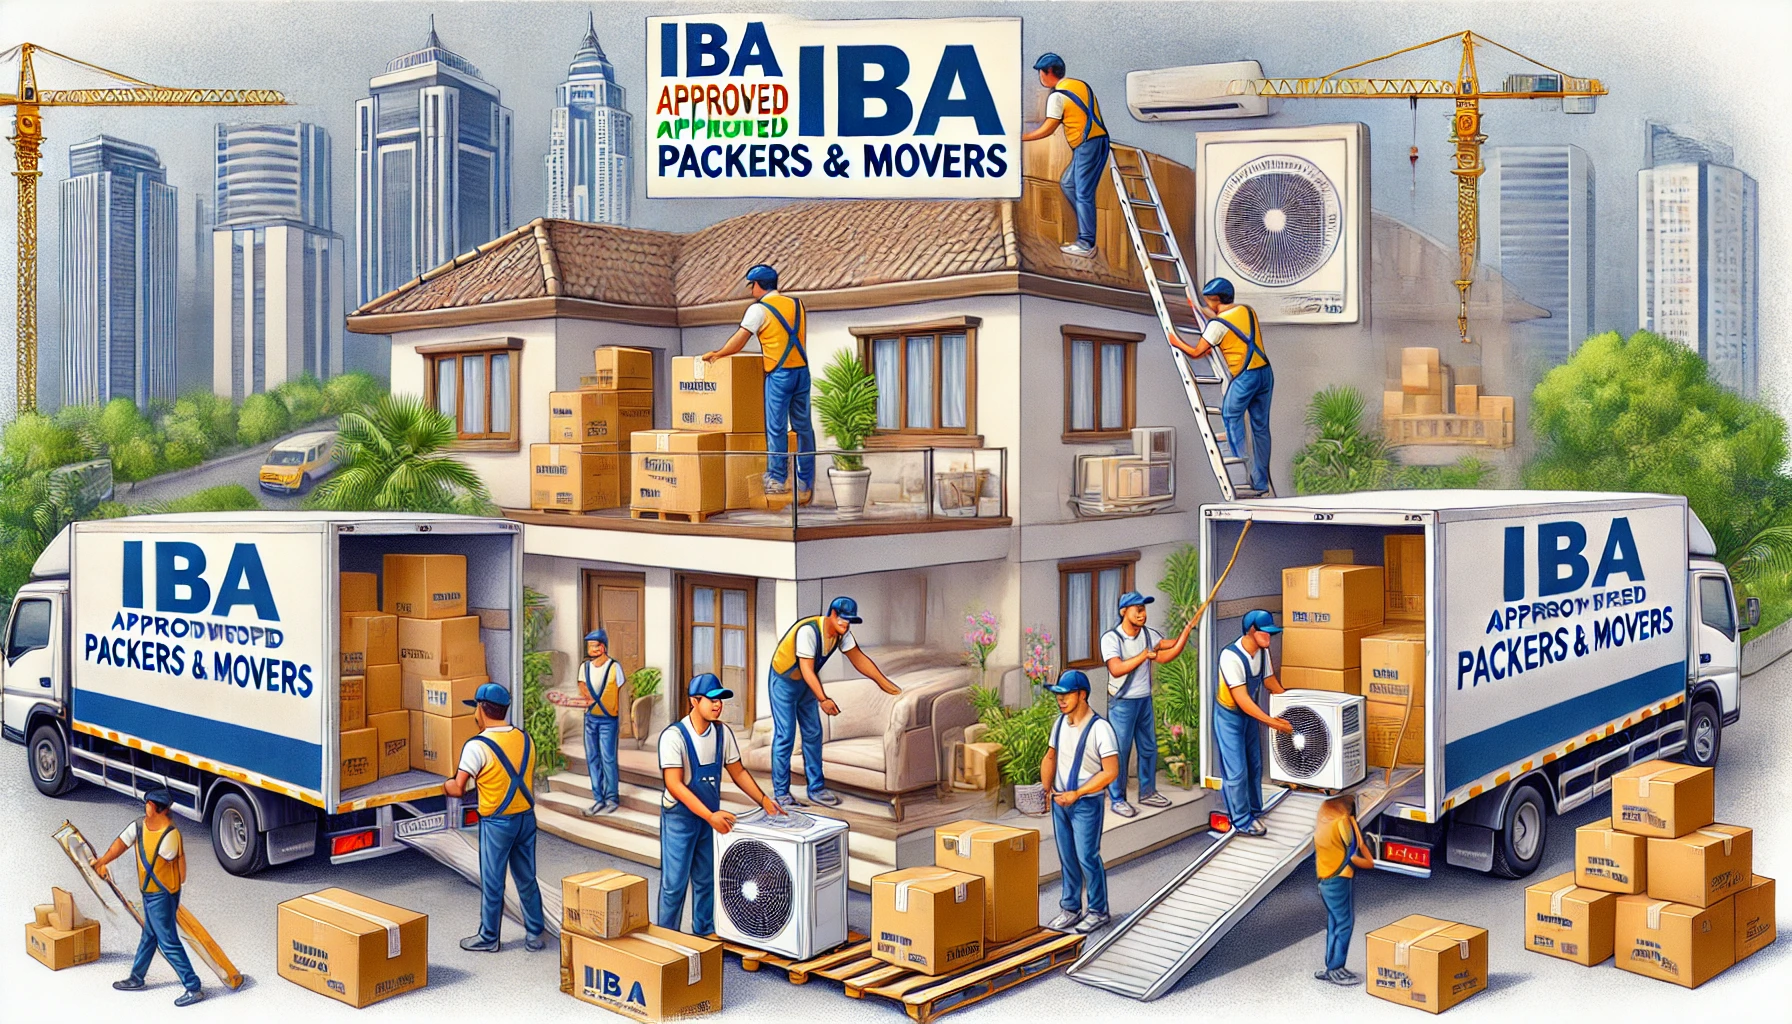 Iba Approved Packers And Movers 